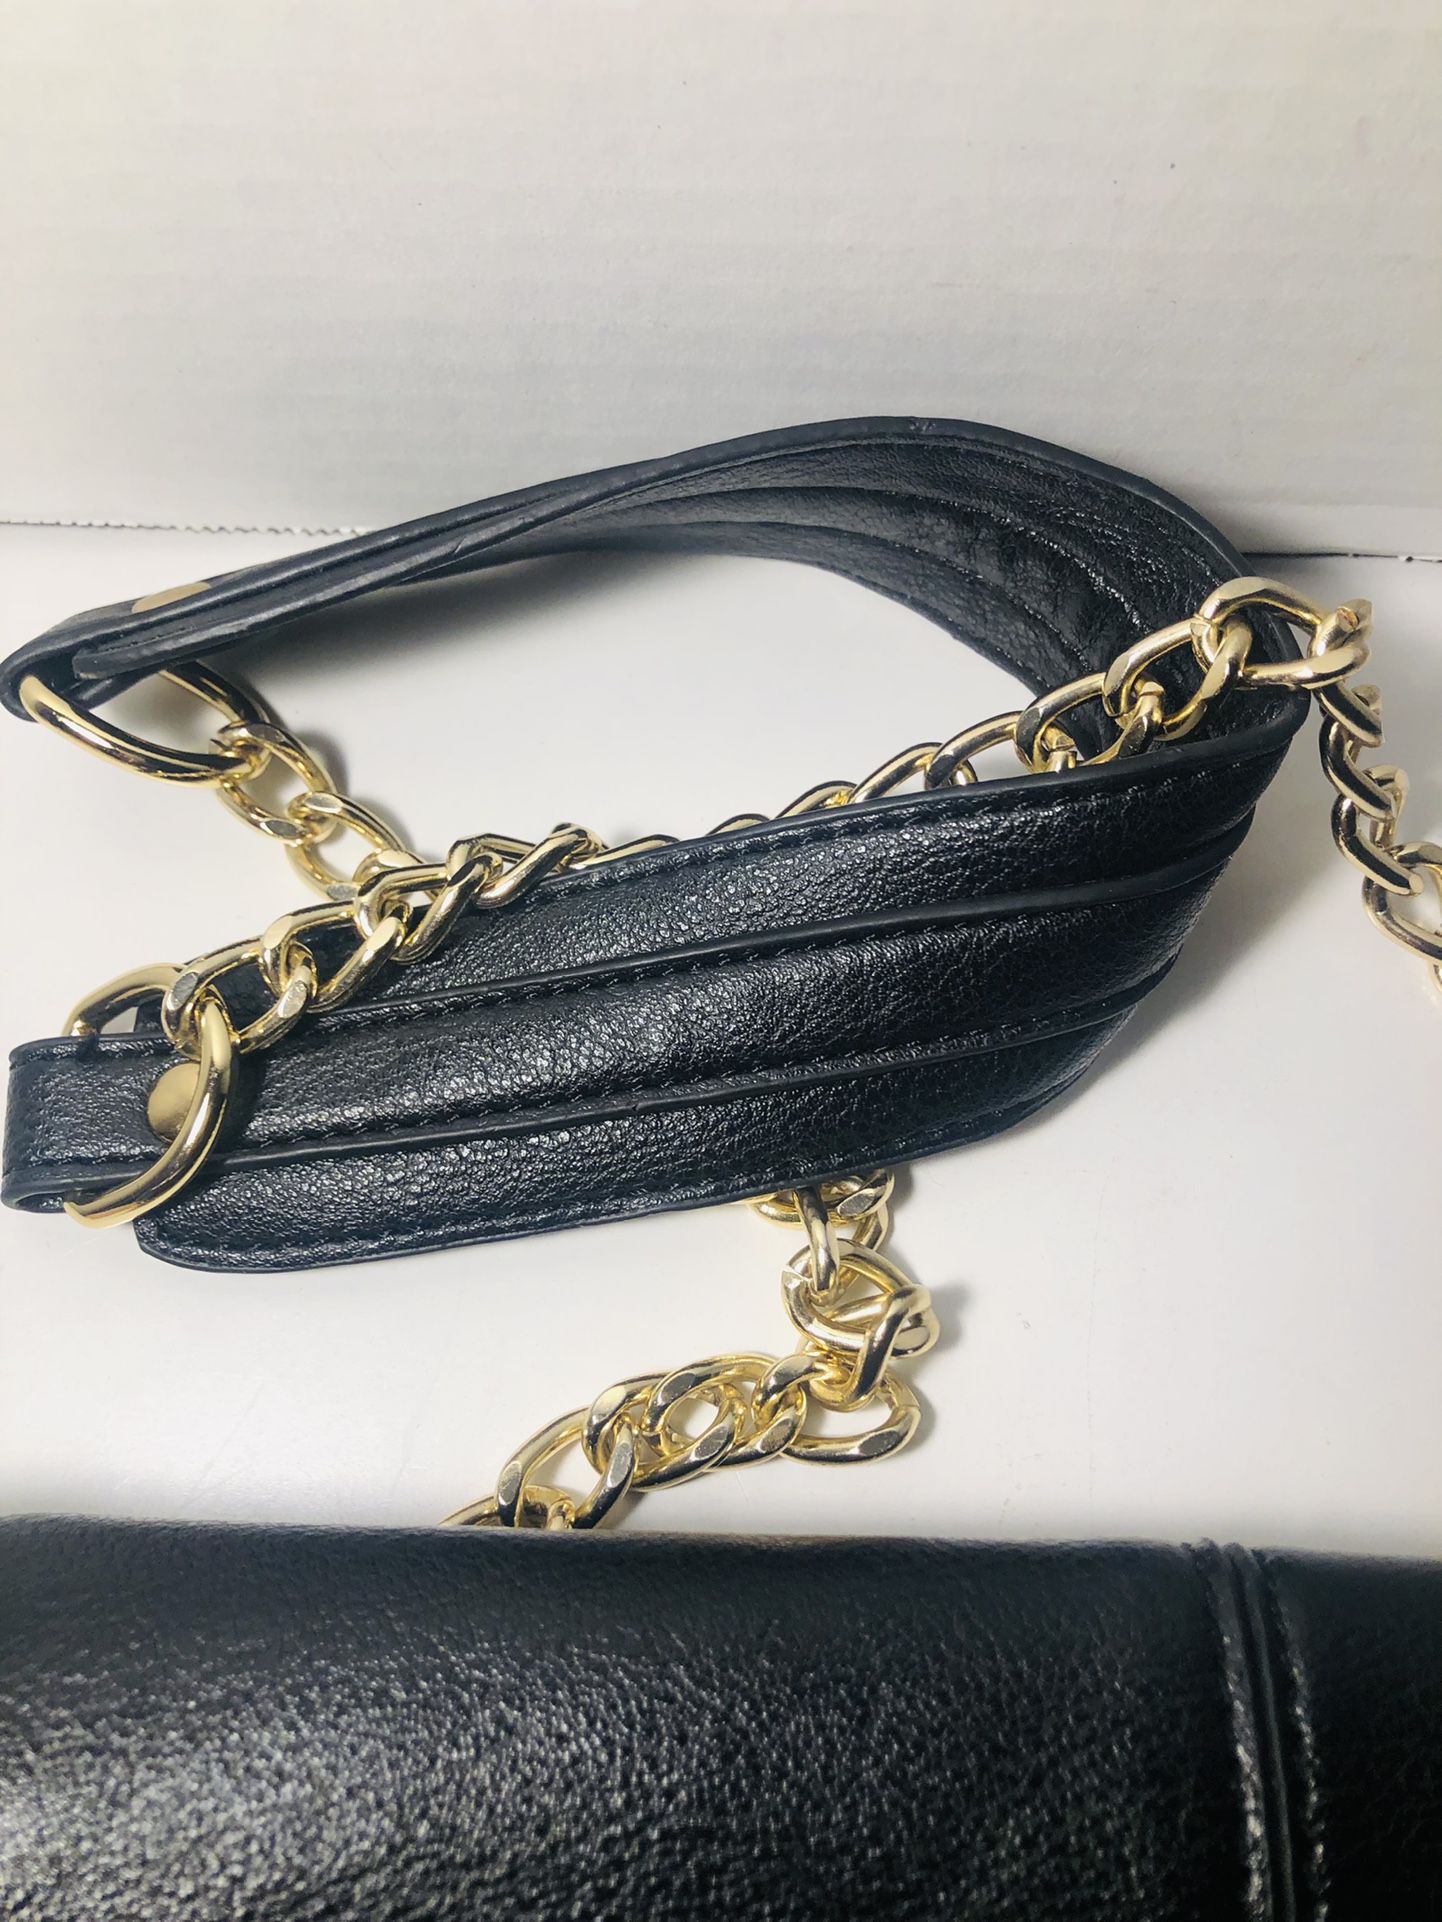 BCBG Bag With Gold Chain Strap